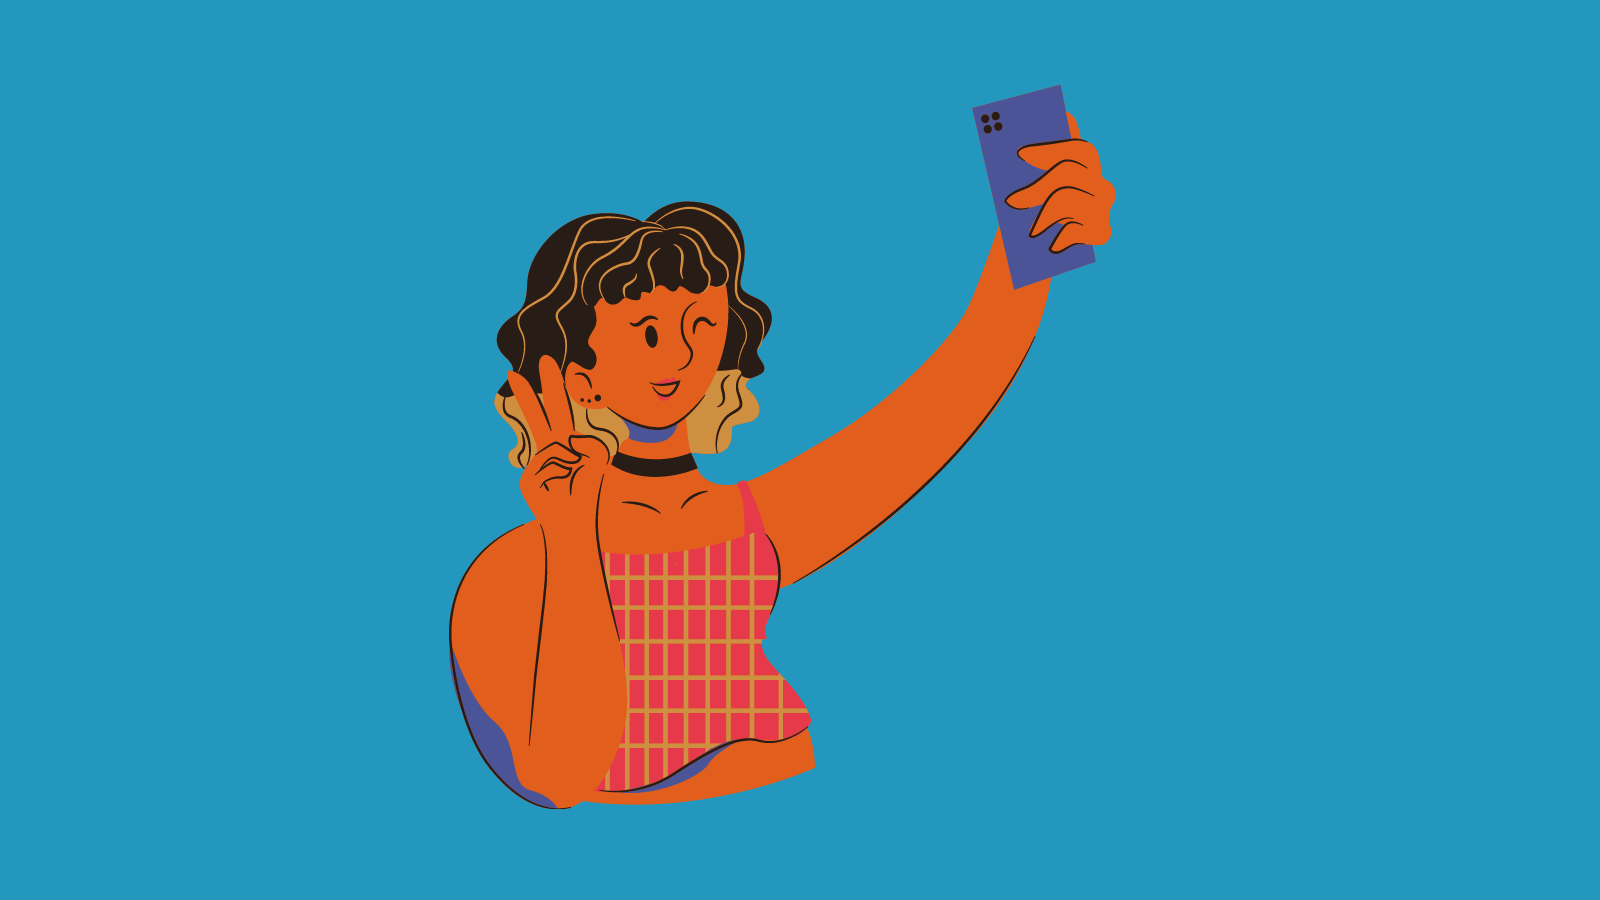 A young person taking a selfie